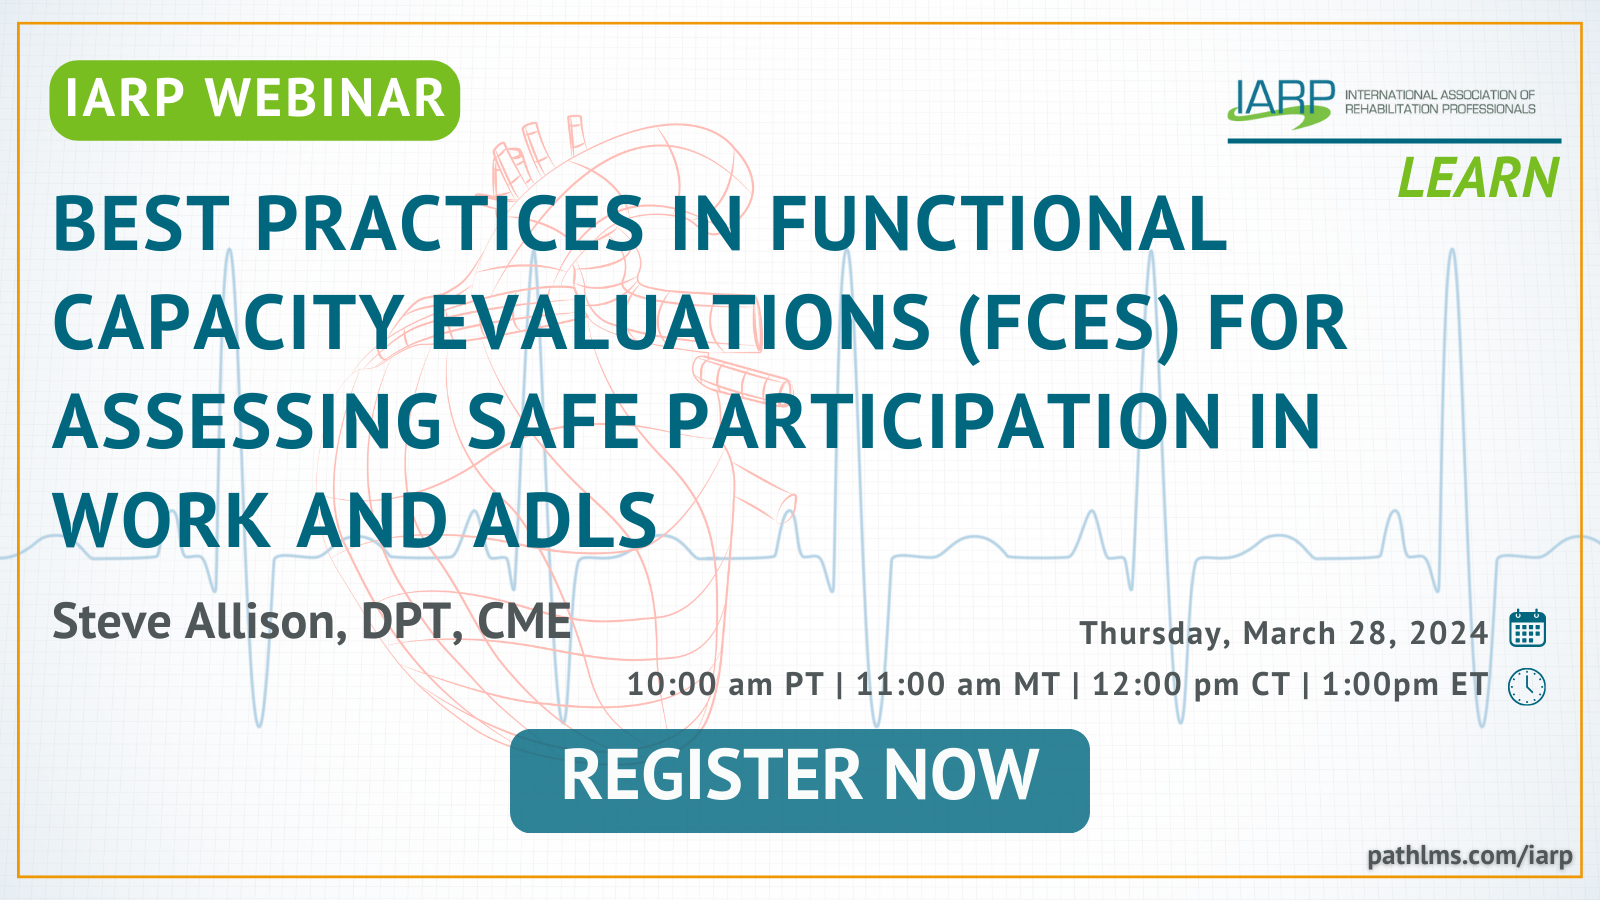 Upcoming Webinar: Best Practices in Functional Capacity Evaluations (FCEs) for Assessing Safe Participation in Work and ADLs